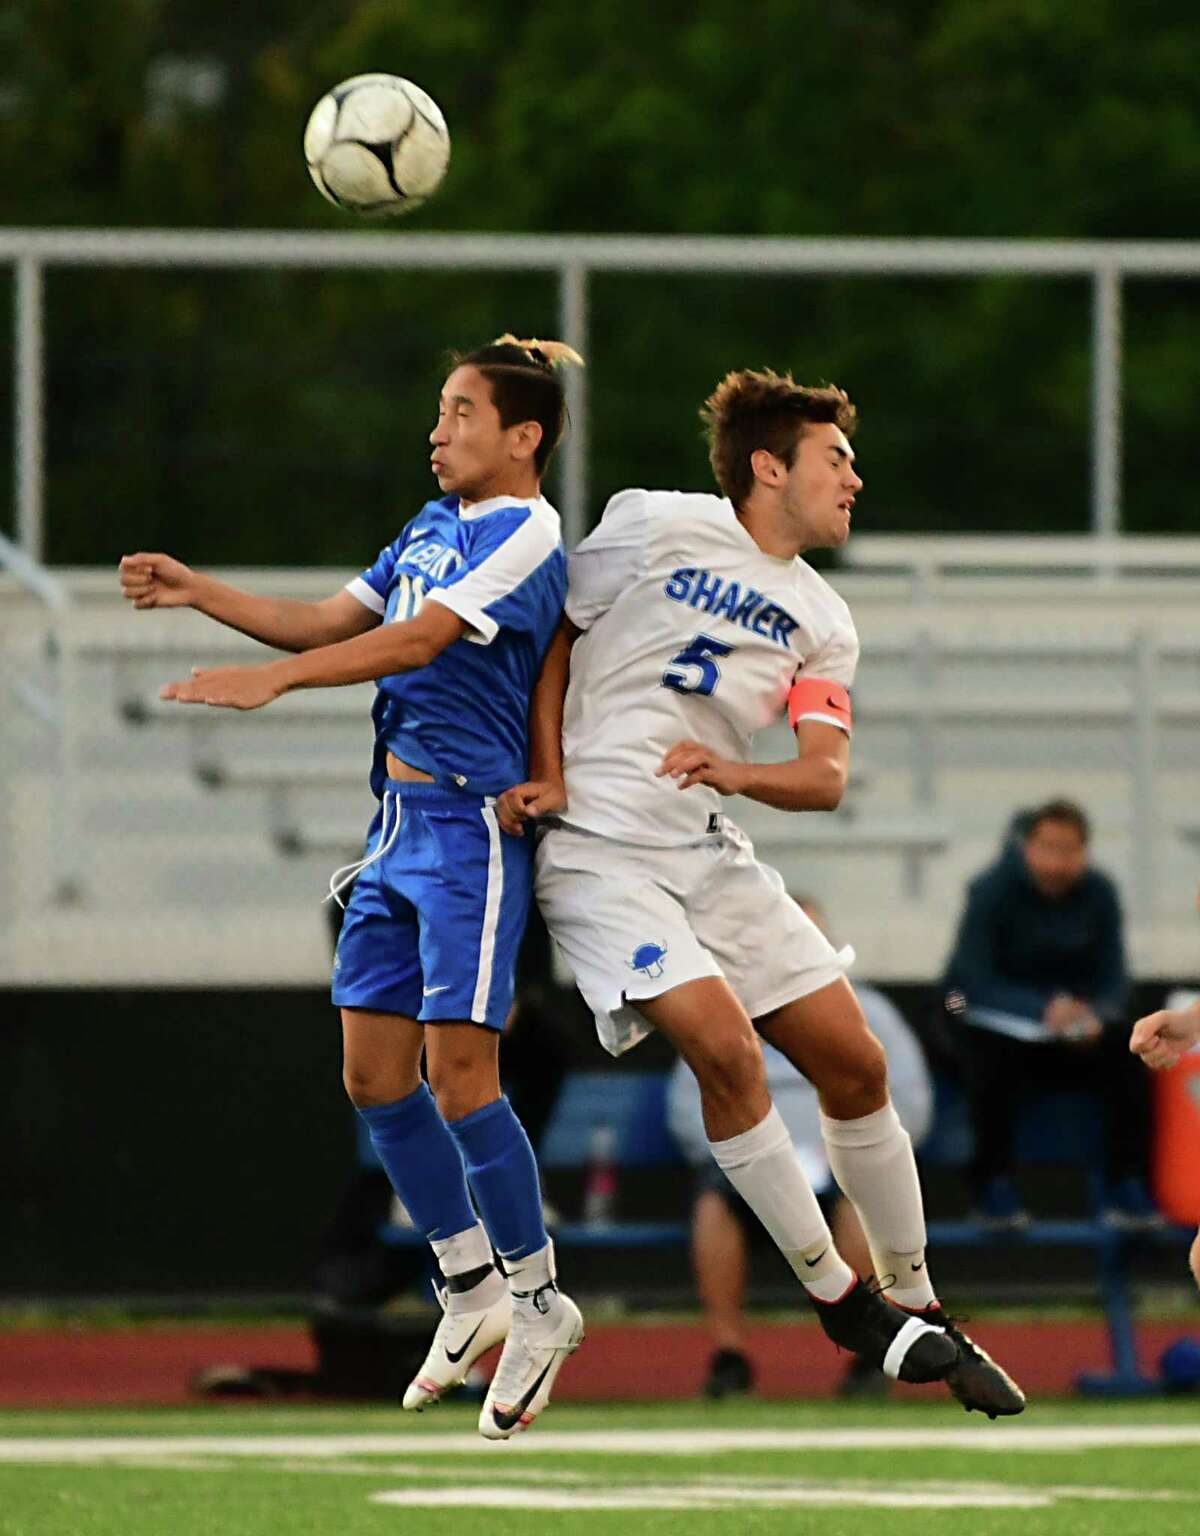 Albany's Sakhi Ghulam Qadir, left, and Shaker's Garrett Drake jump up to head the ball during a soccer game on Tuesday, Sept. 24, 2019 in Albany, N.Y. (Lori Van Buren/Times Union)